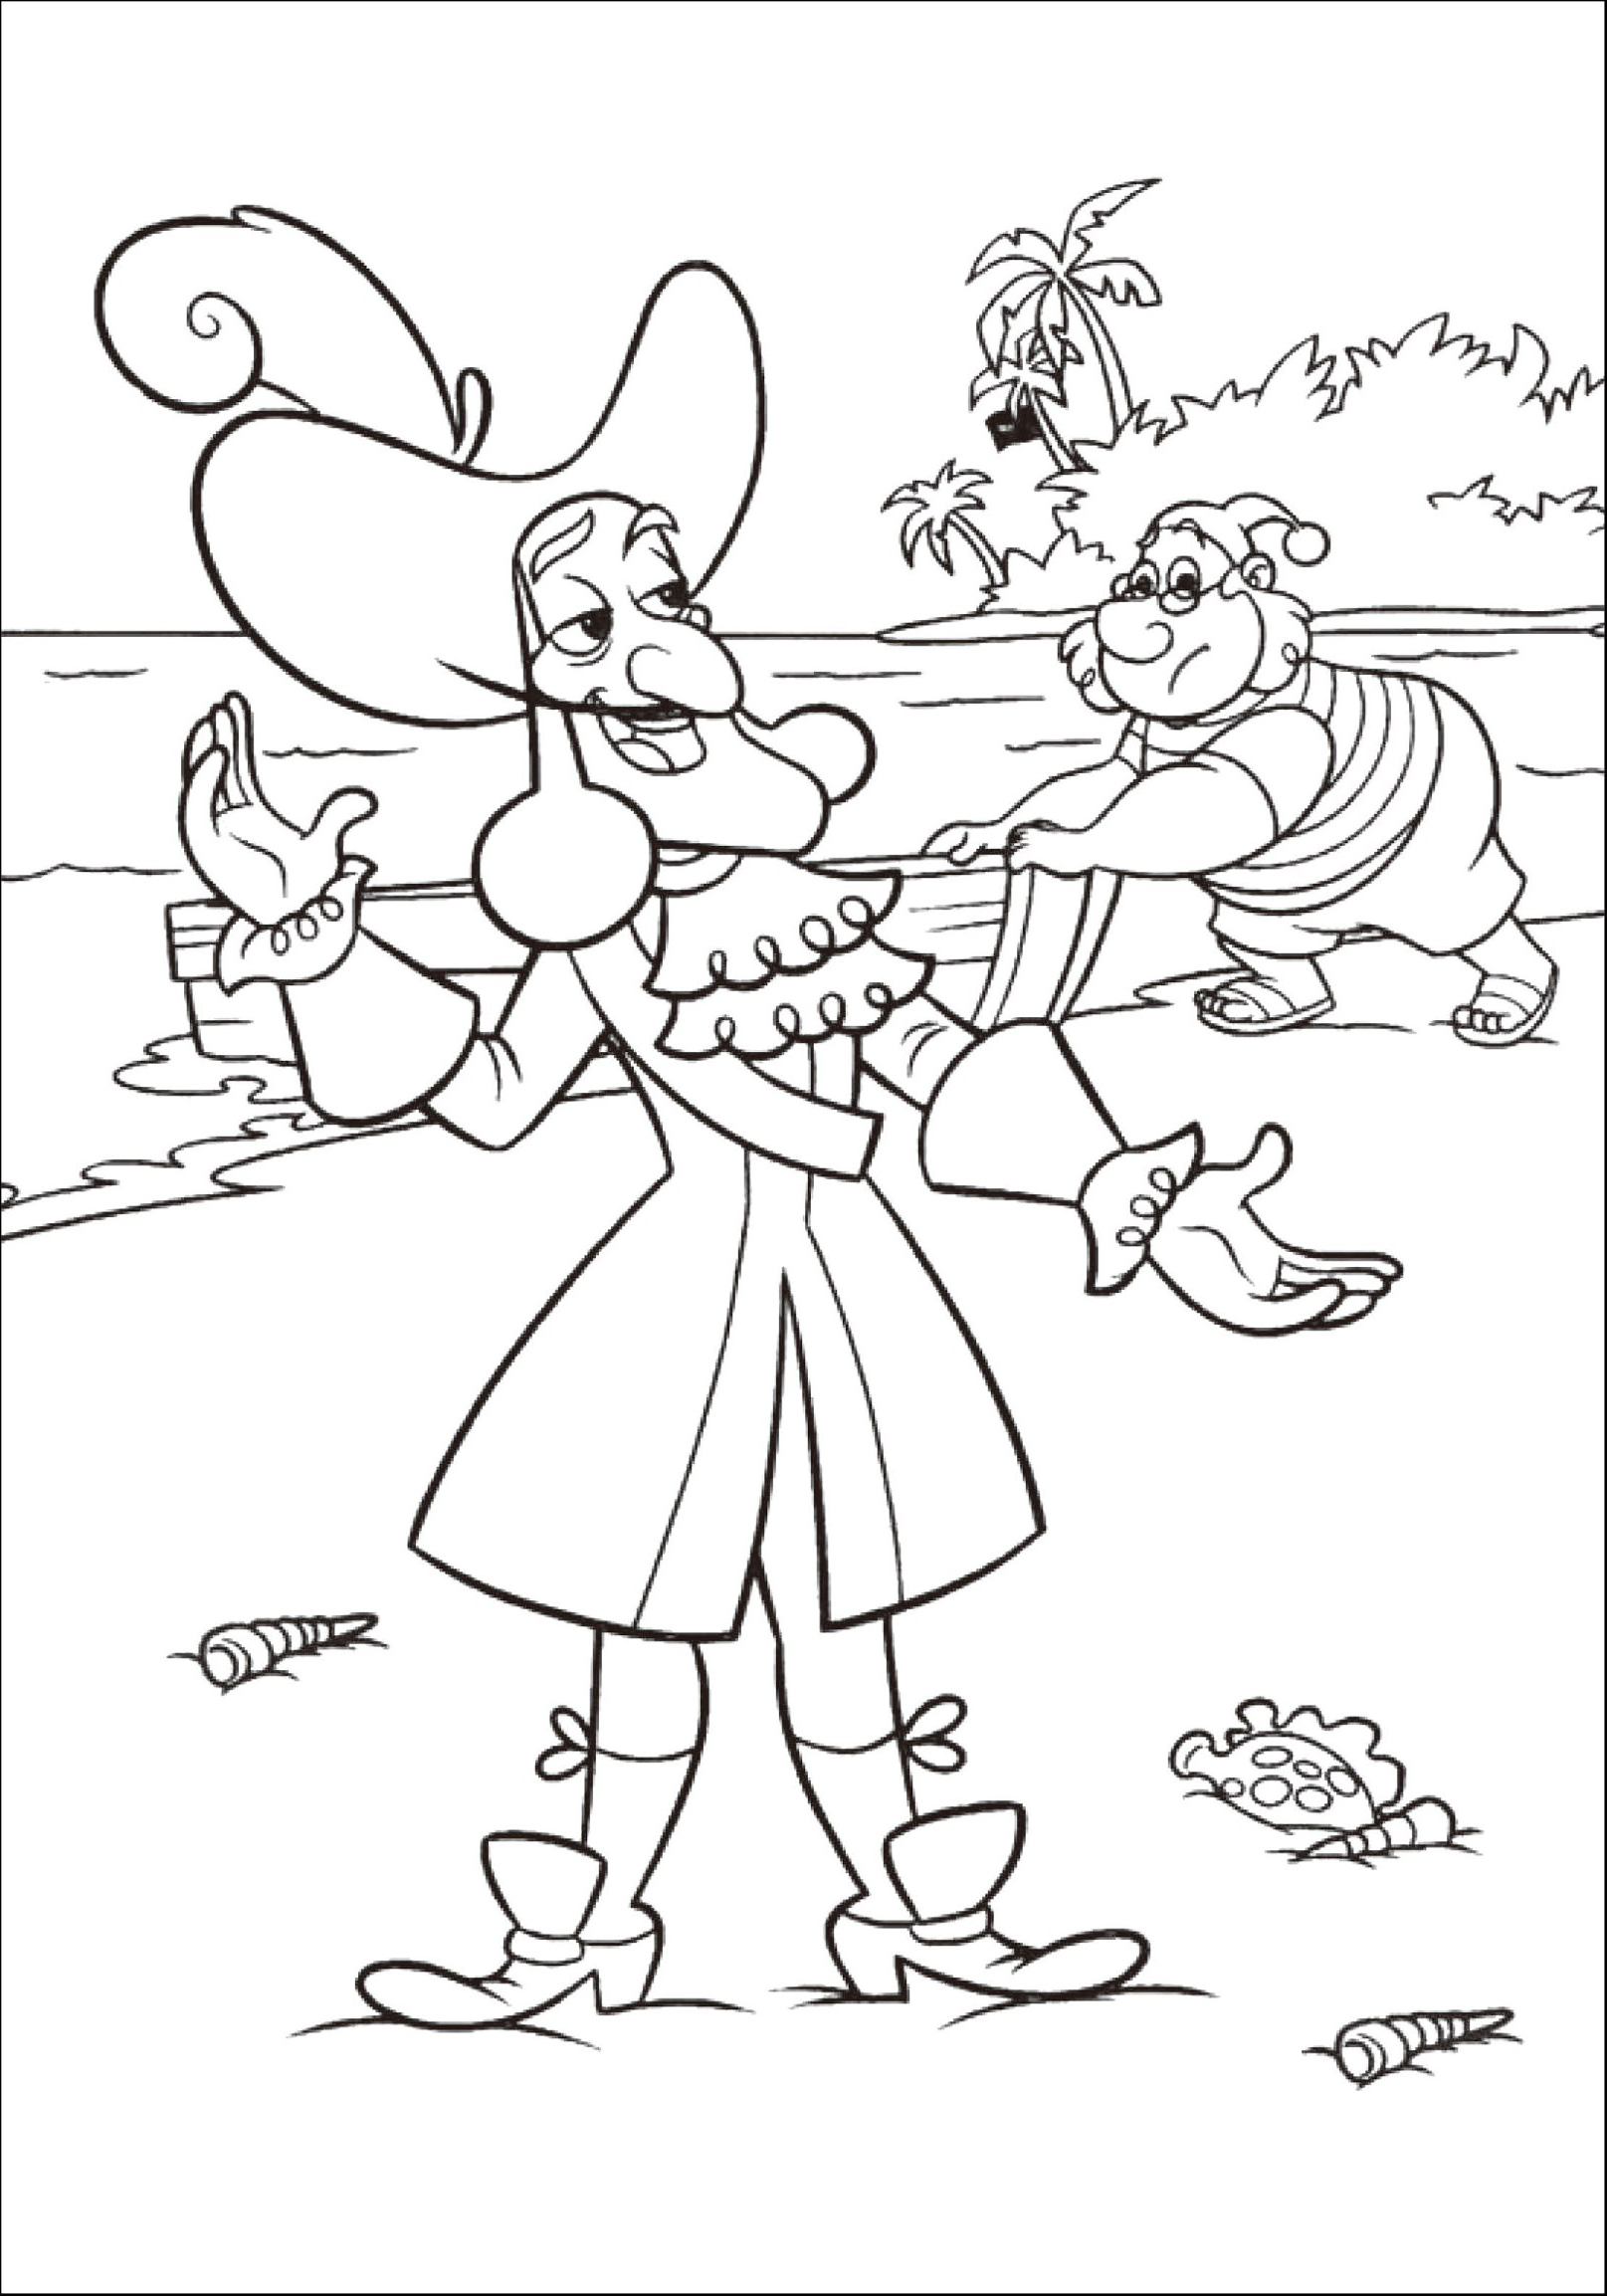 Coloring page Jake and the Never Land Pirates Pirates have sailed to the island